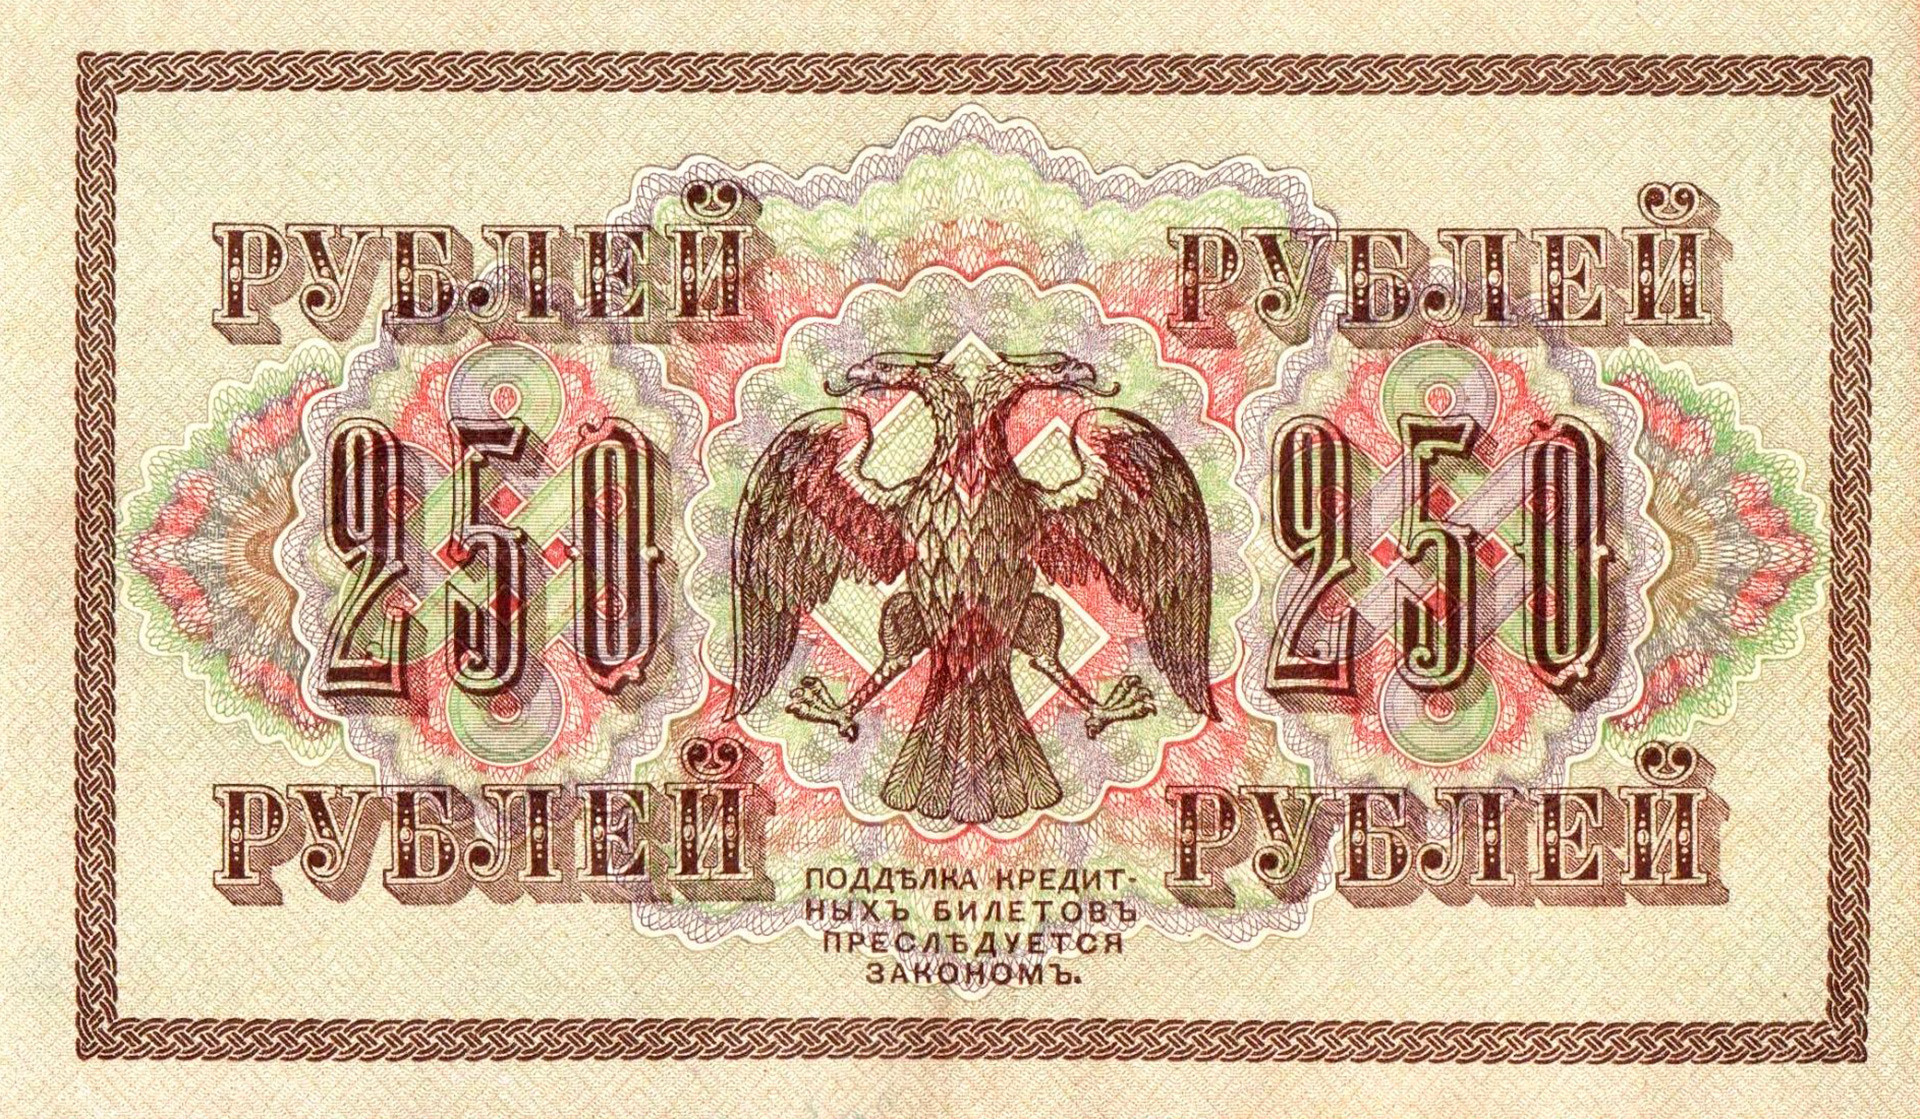 A 250-ruble banknote with swastika on the background